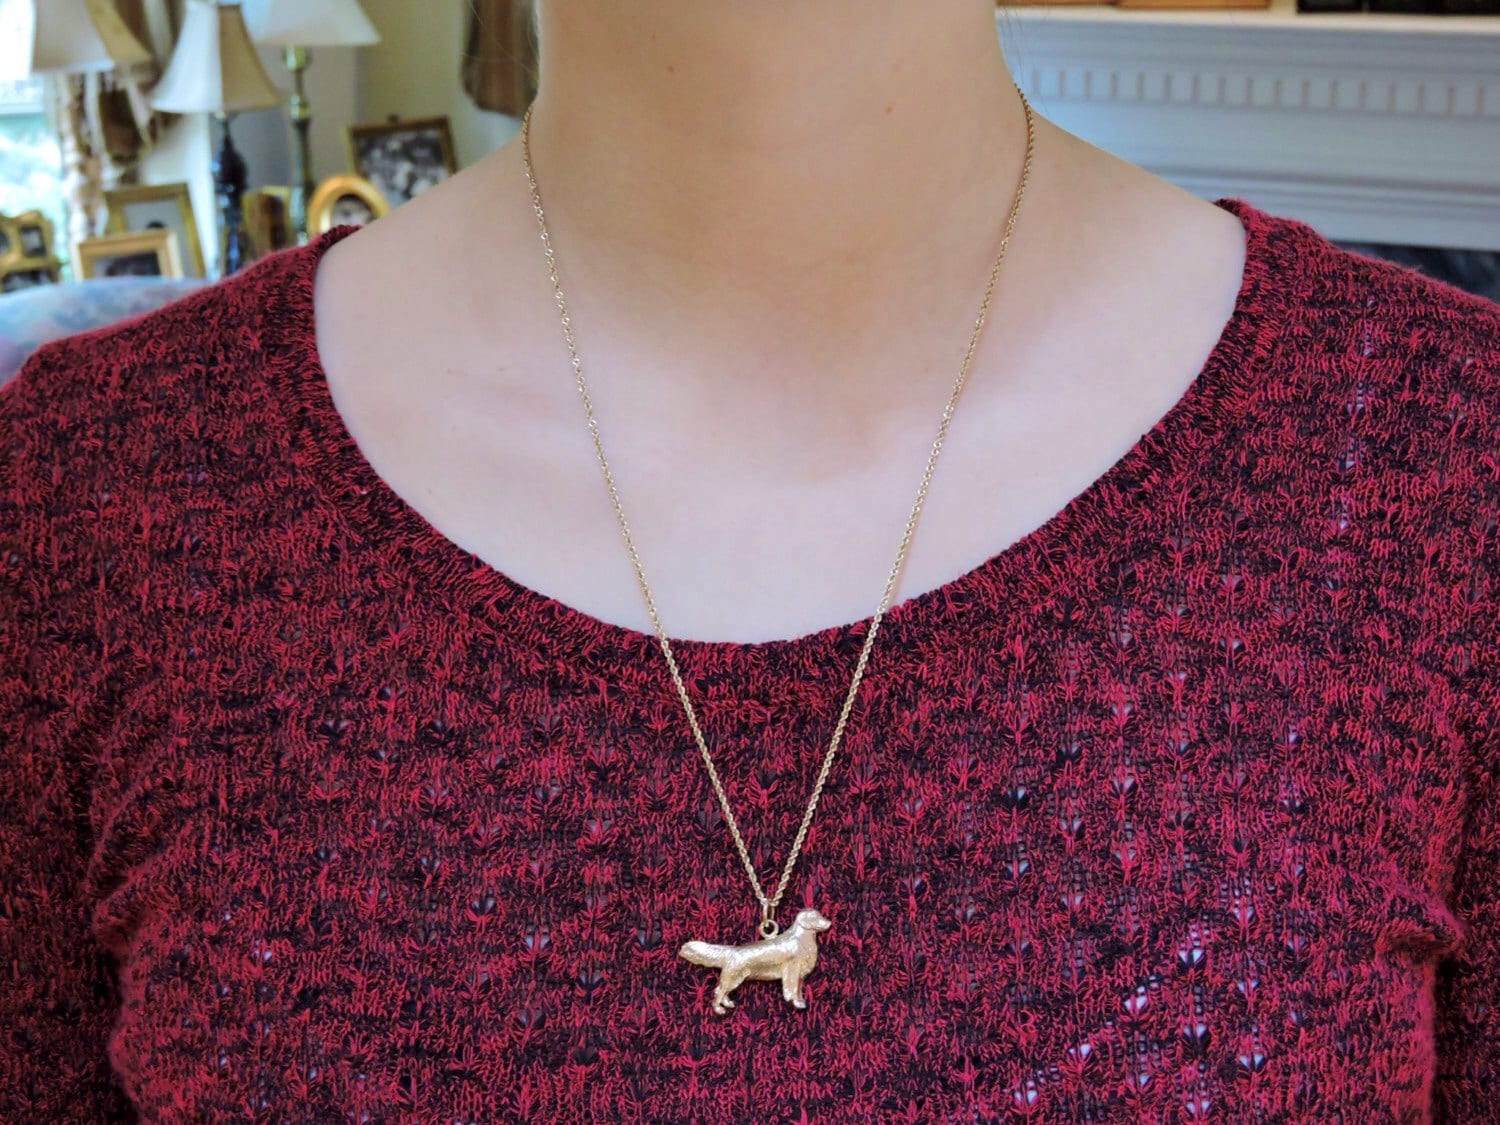 14k Yellow Gold Golden Retriever Pendant or Necklace optional - Etsy